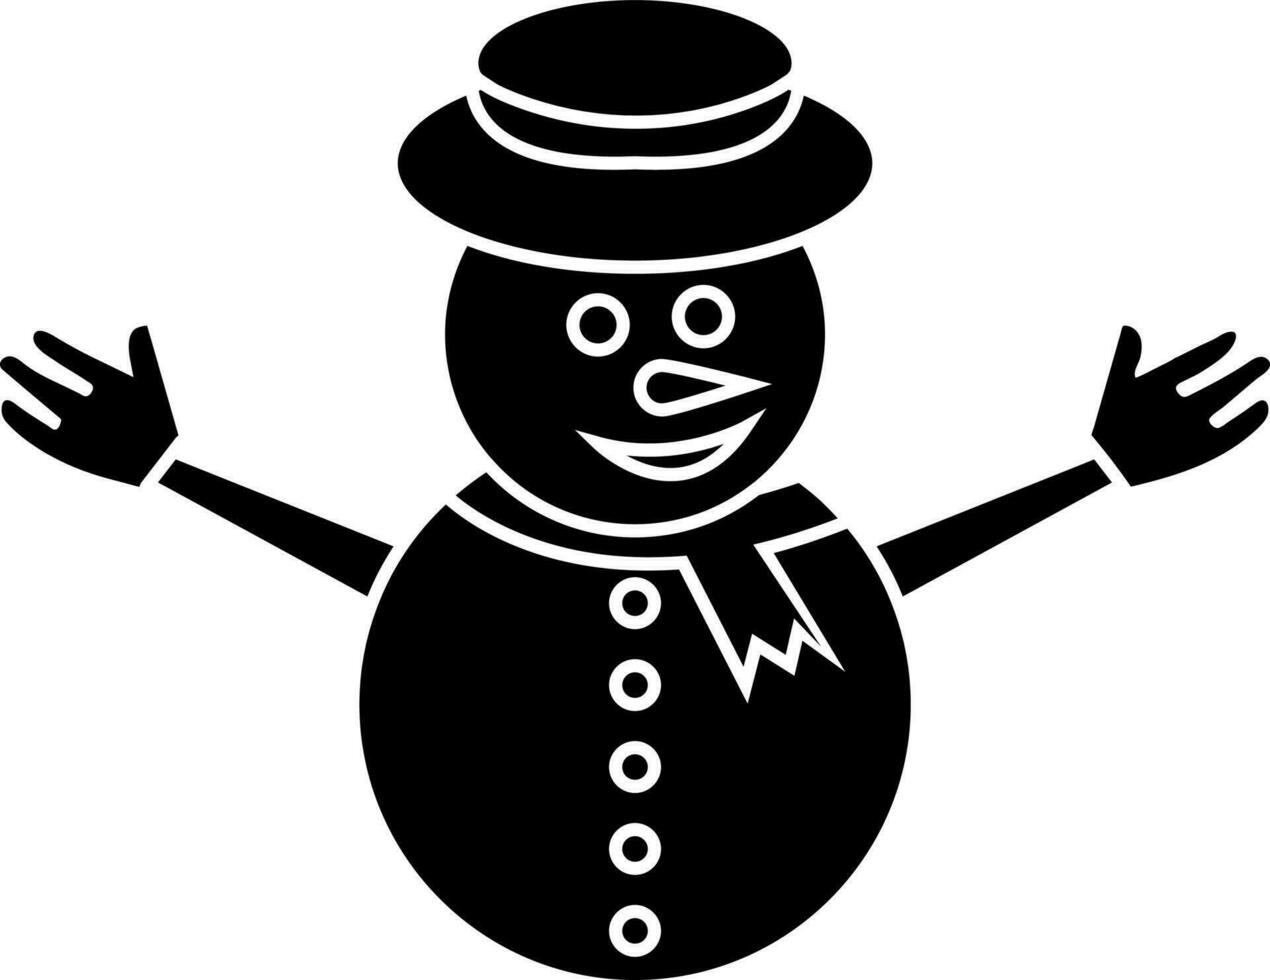 Isolated icon of smiling snowman. vector